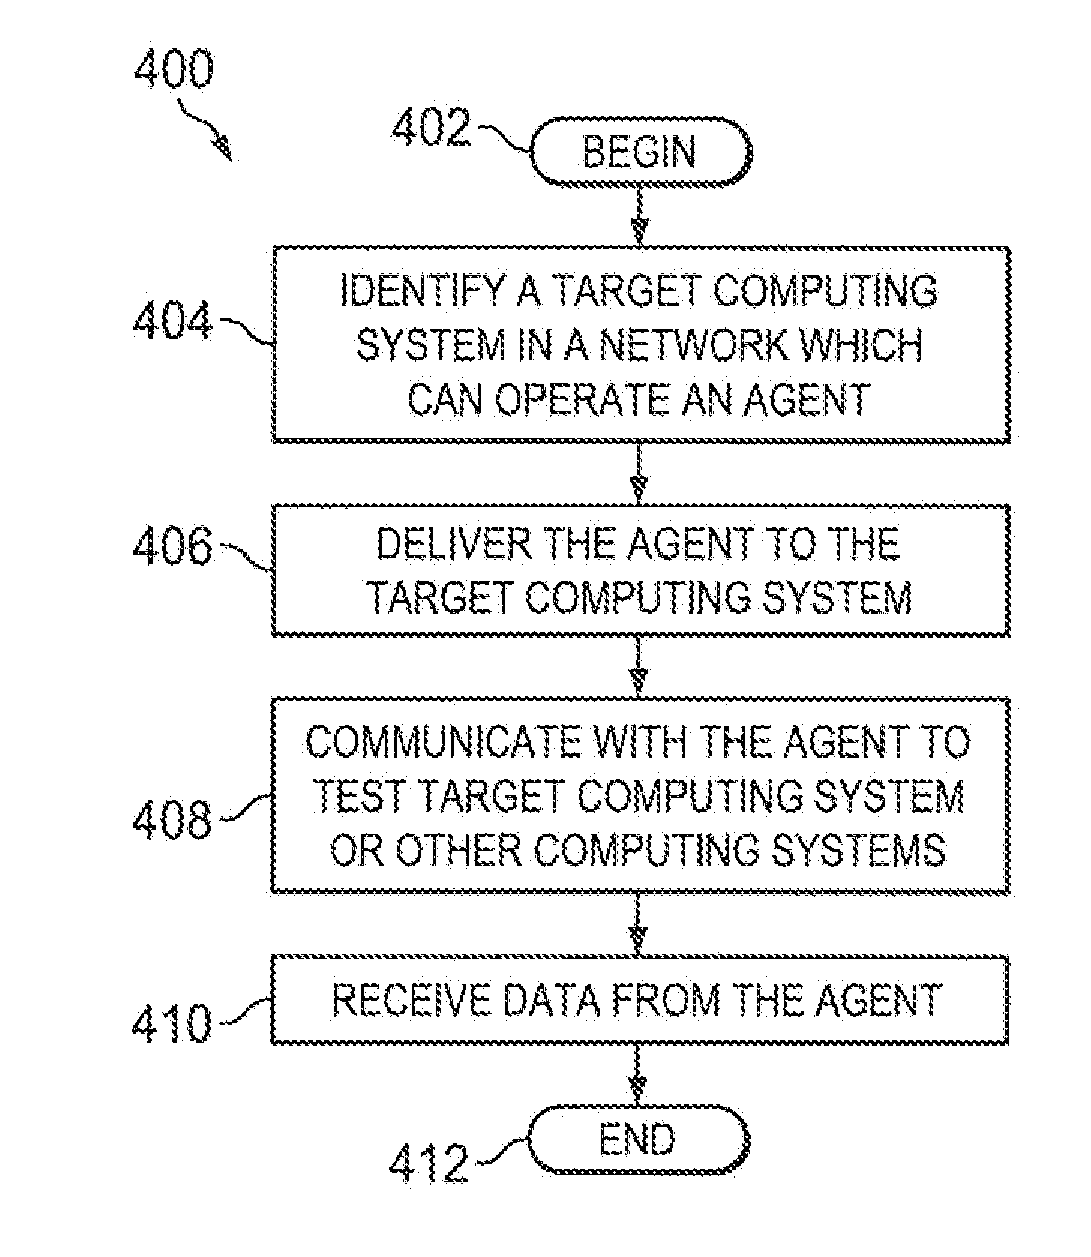 Methods and systems for providing a framework to test the security of computing system over a network